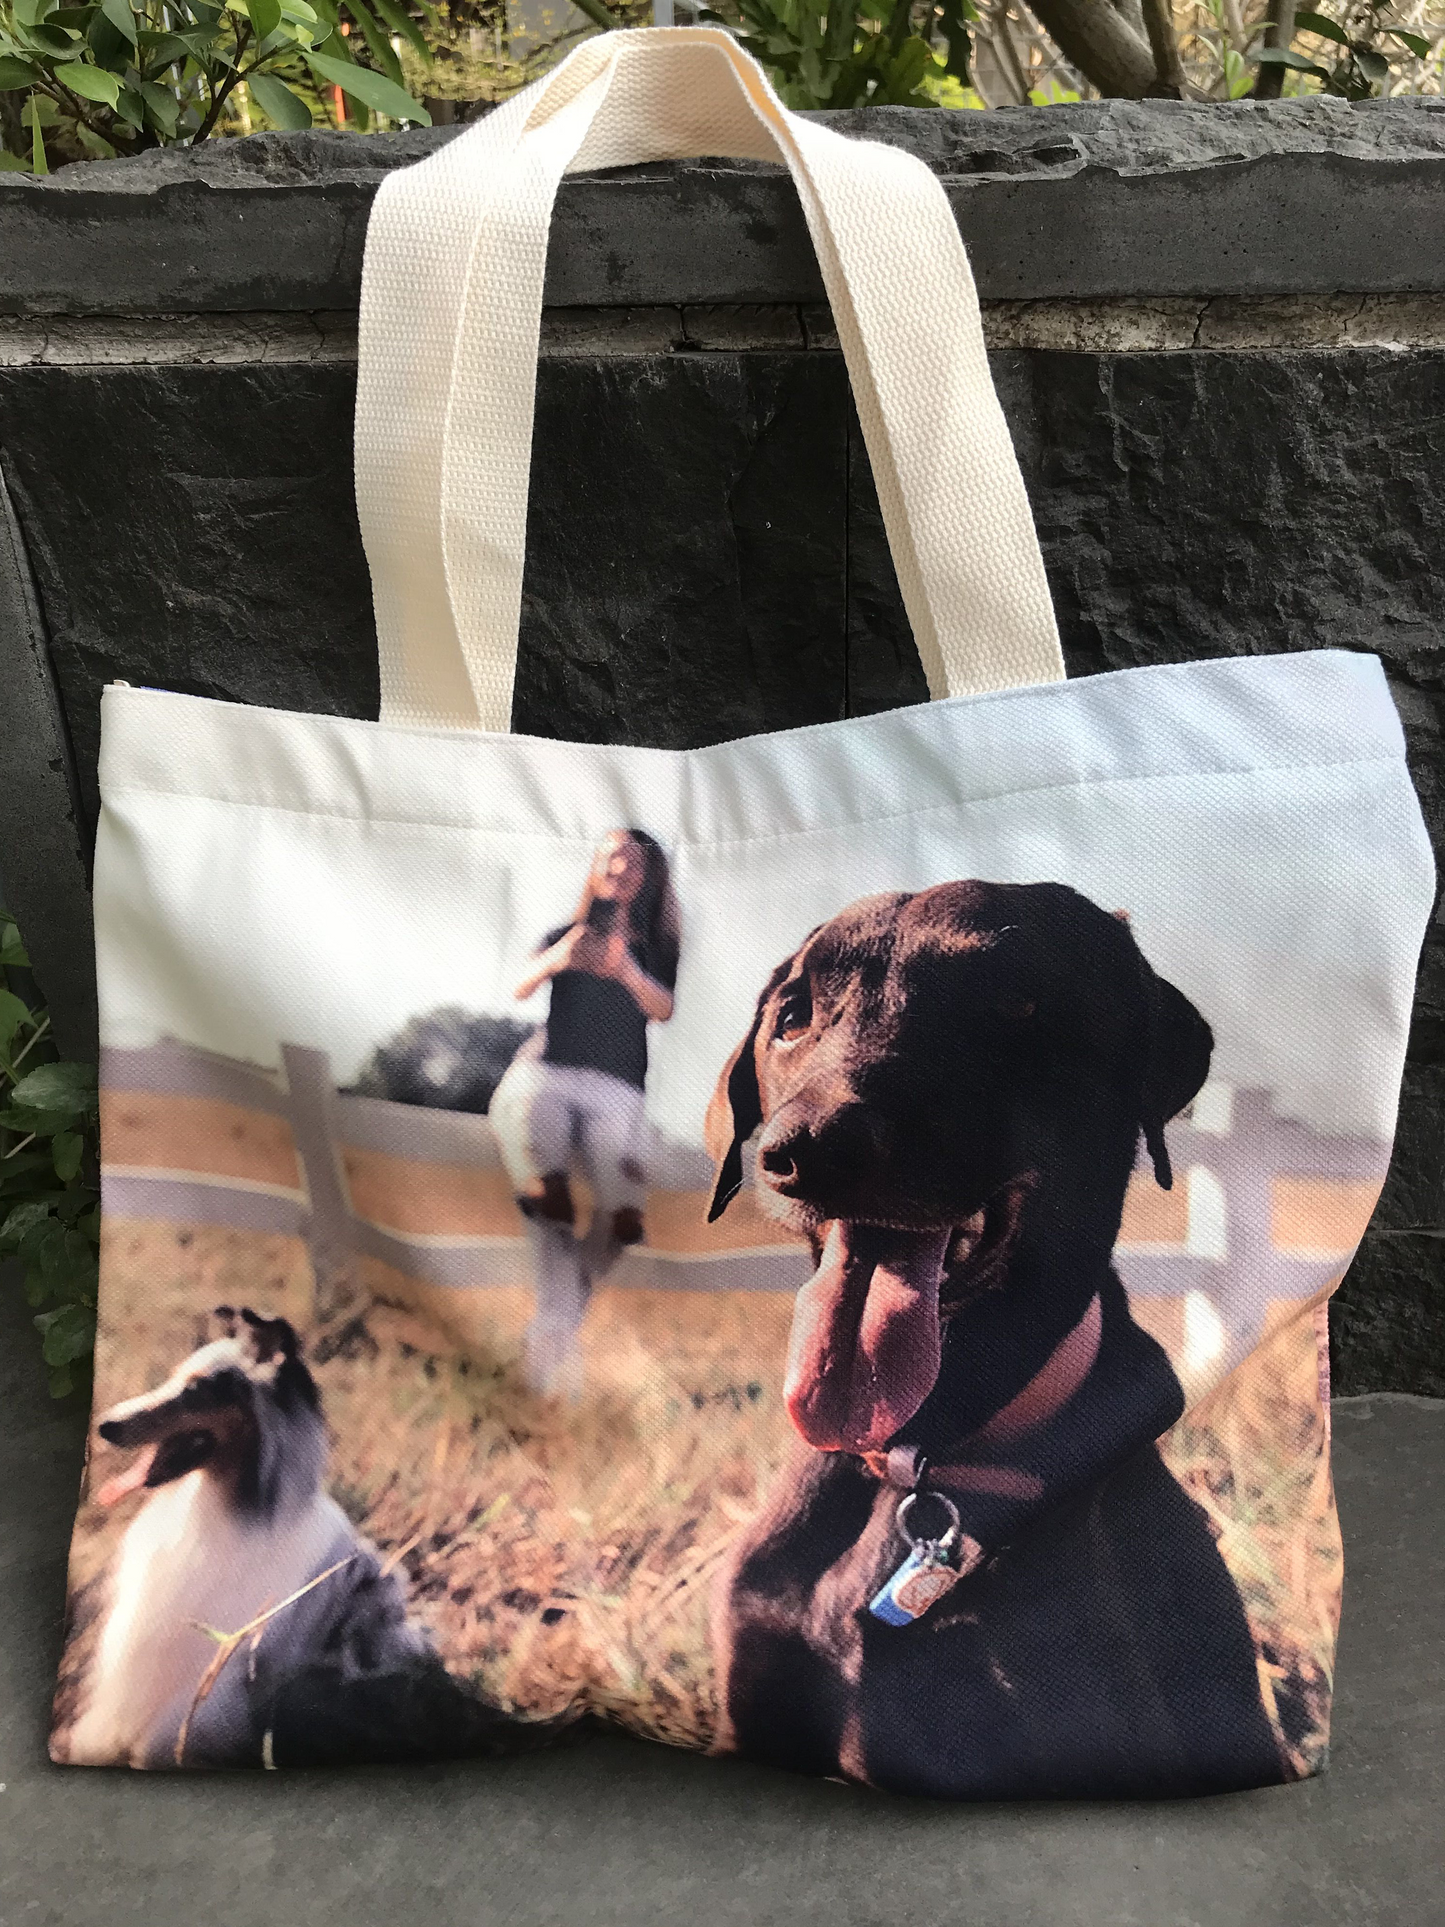 A all over print custom tote bag with a photo of a woman and two dogs is a thoughtful and unique gift. The bag is large and the photo is vibrant, making it a conversation starter.